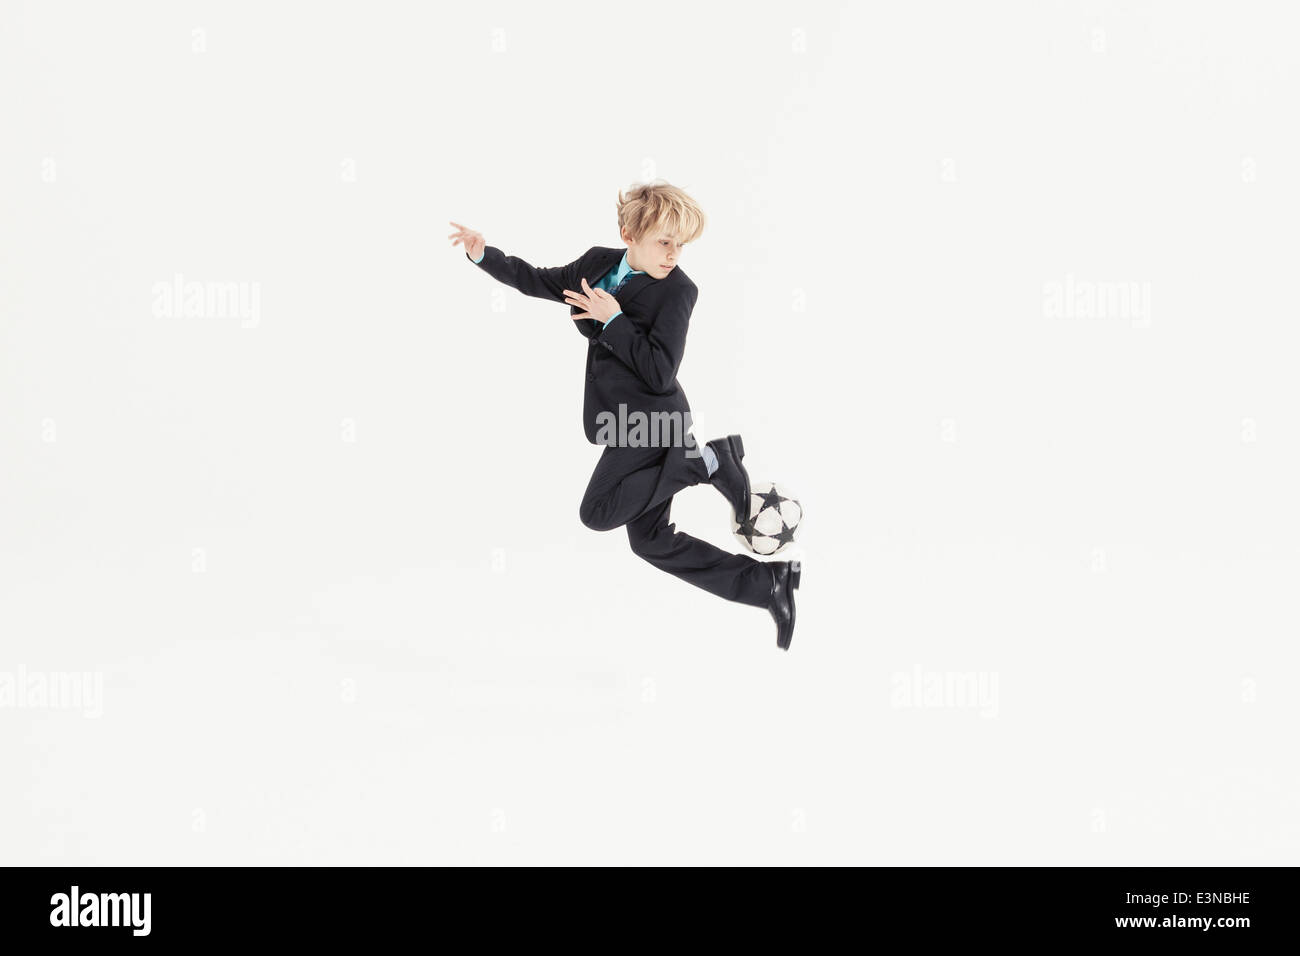 Full length of boy dressed as businessman playing soccer against white background Stock Photo